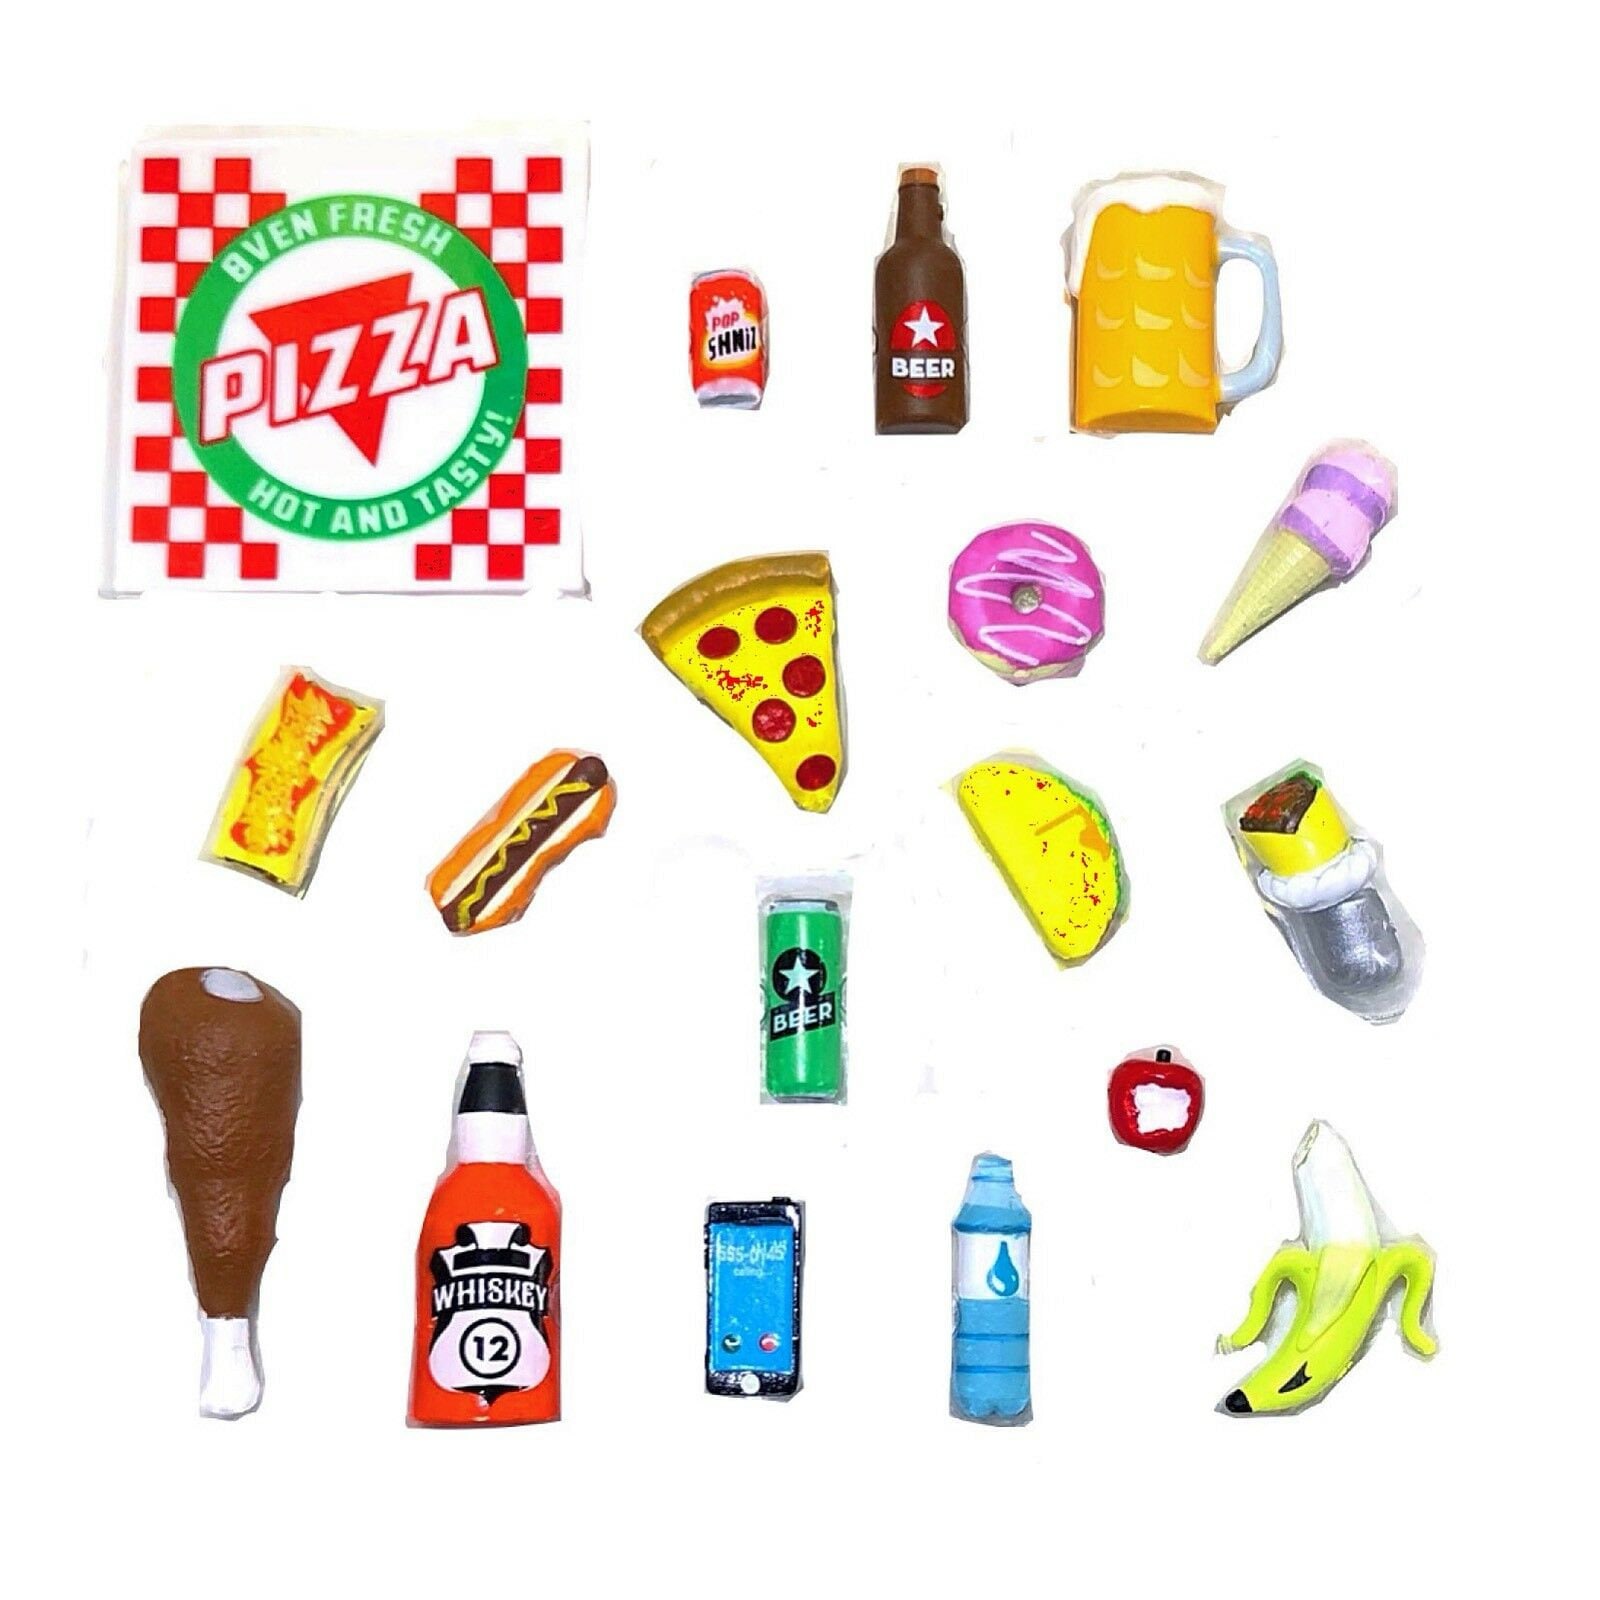 Super Action Stuff Foodie Recooked 1:12 Scale Action Figure Accessories  Miniature Food Dollhouse 6 7 8 Inch Scale 